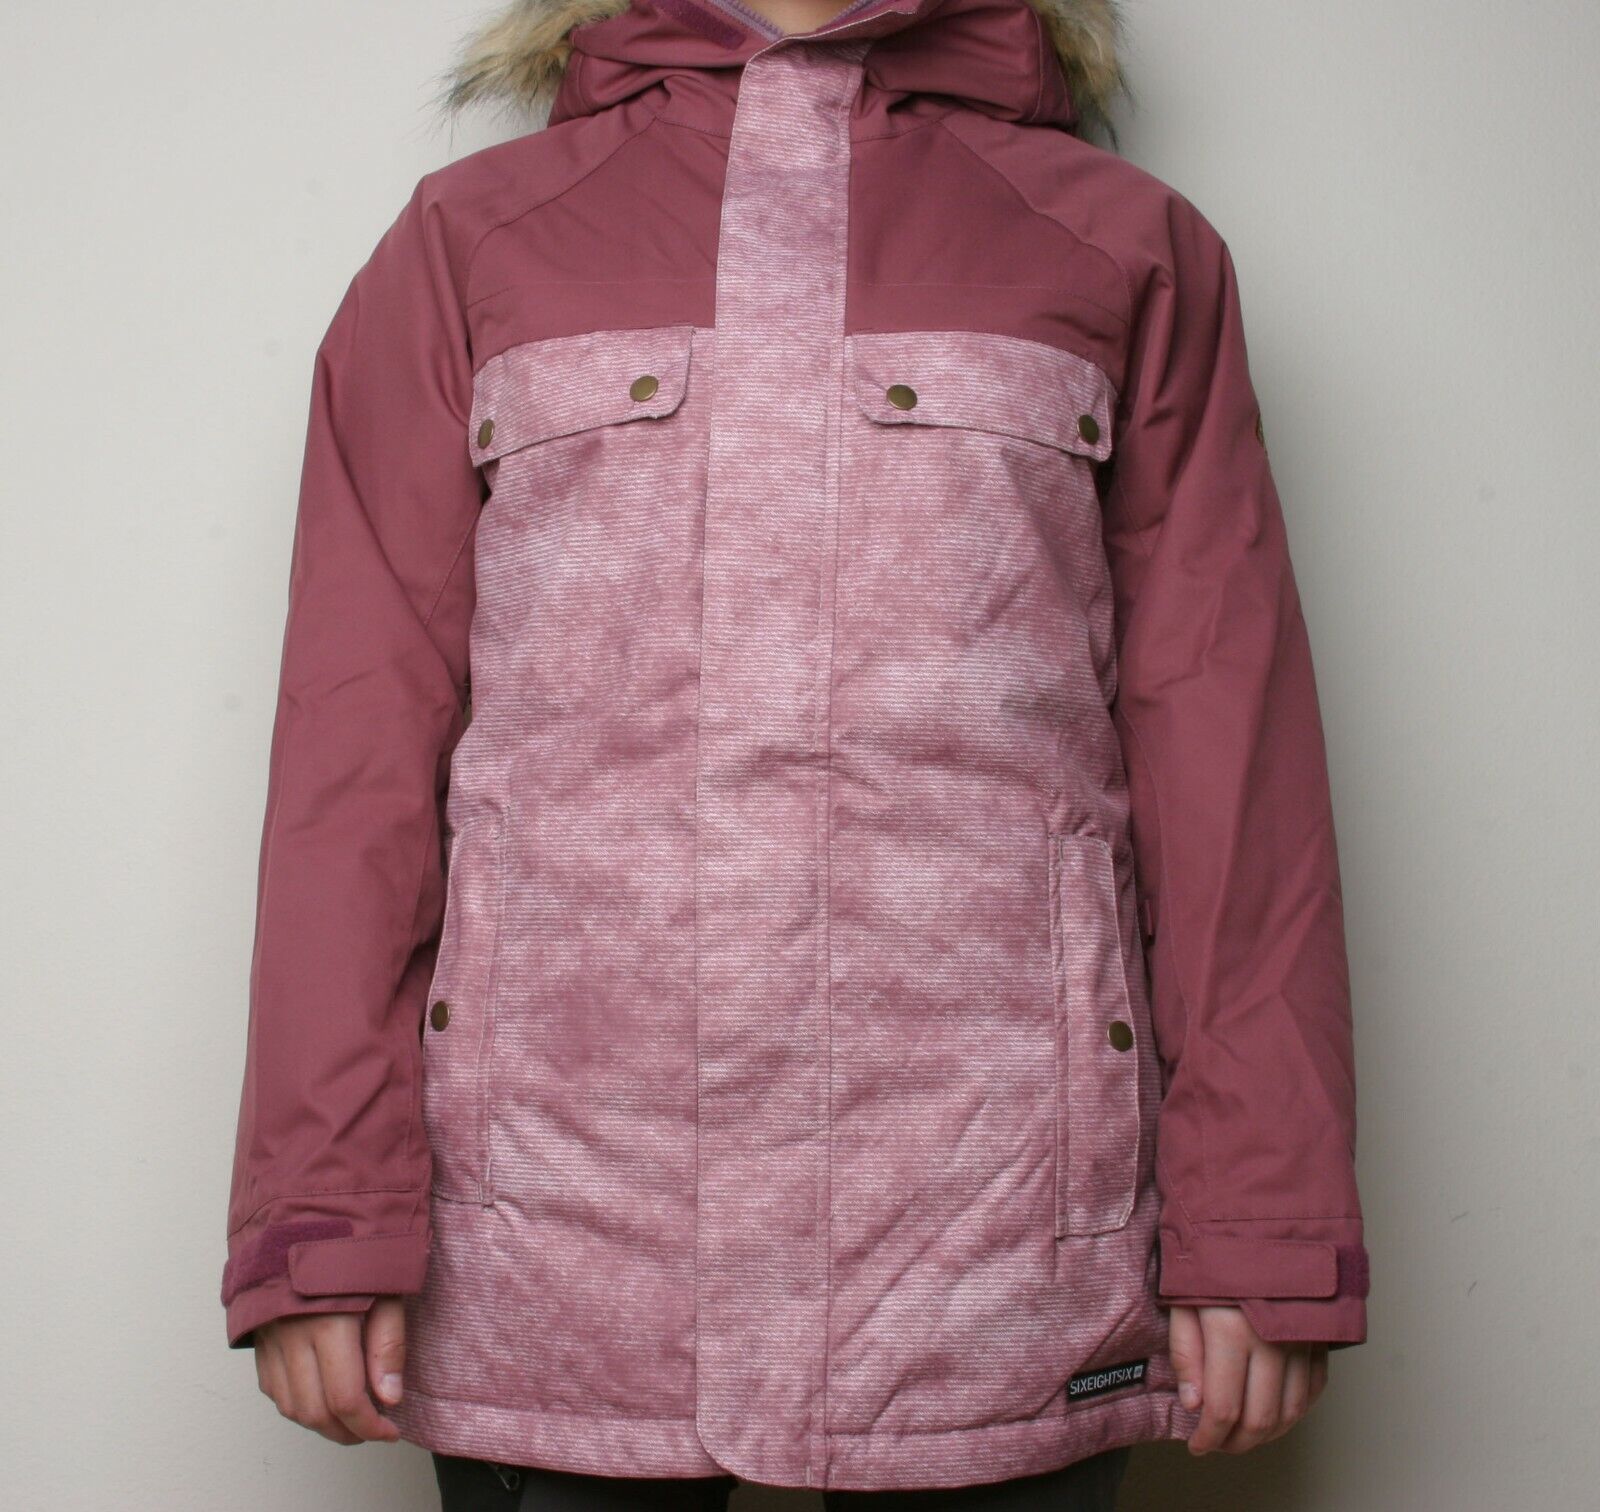 686 Don't miss the campaign Women Dream Insulated Snowboard National products Crushed S Berry Was Jacket